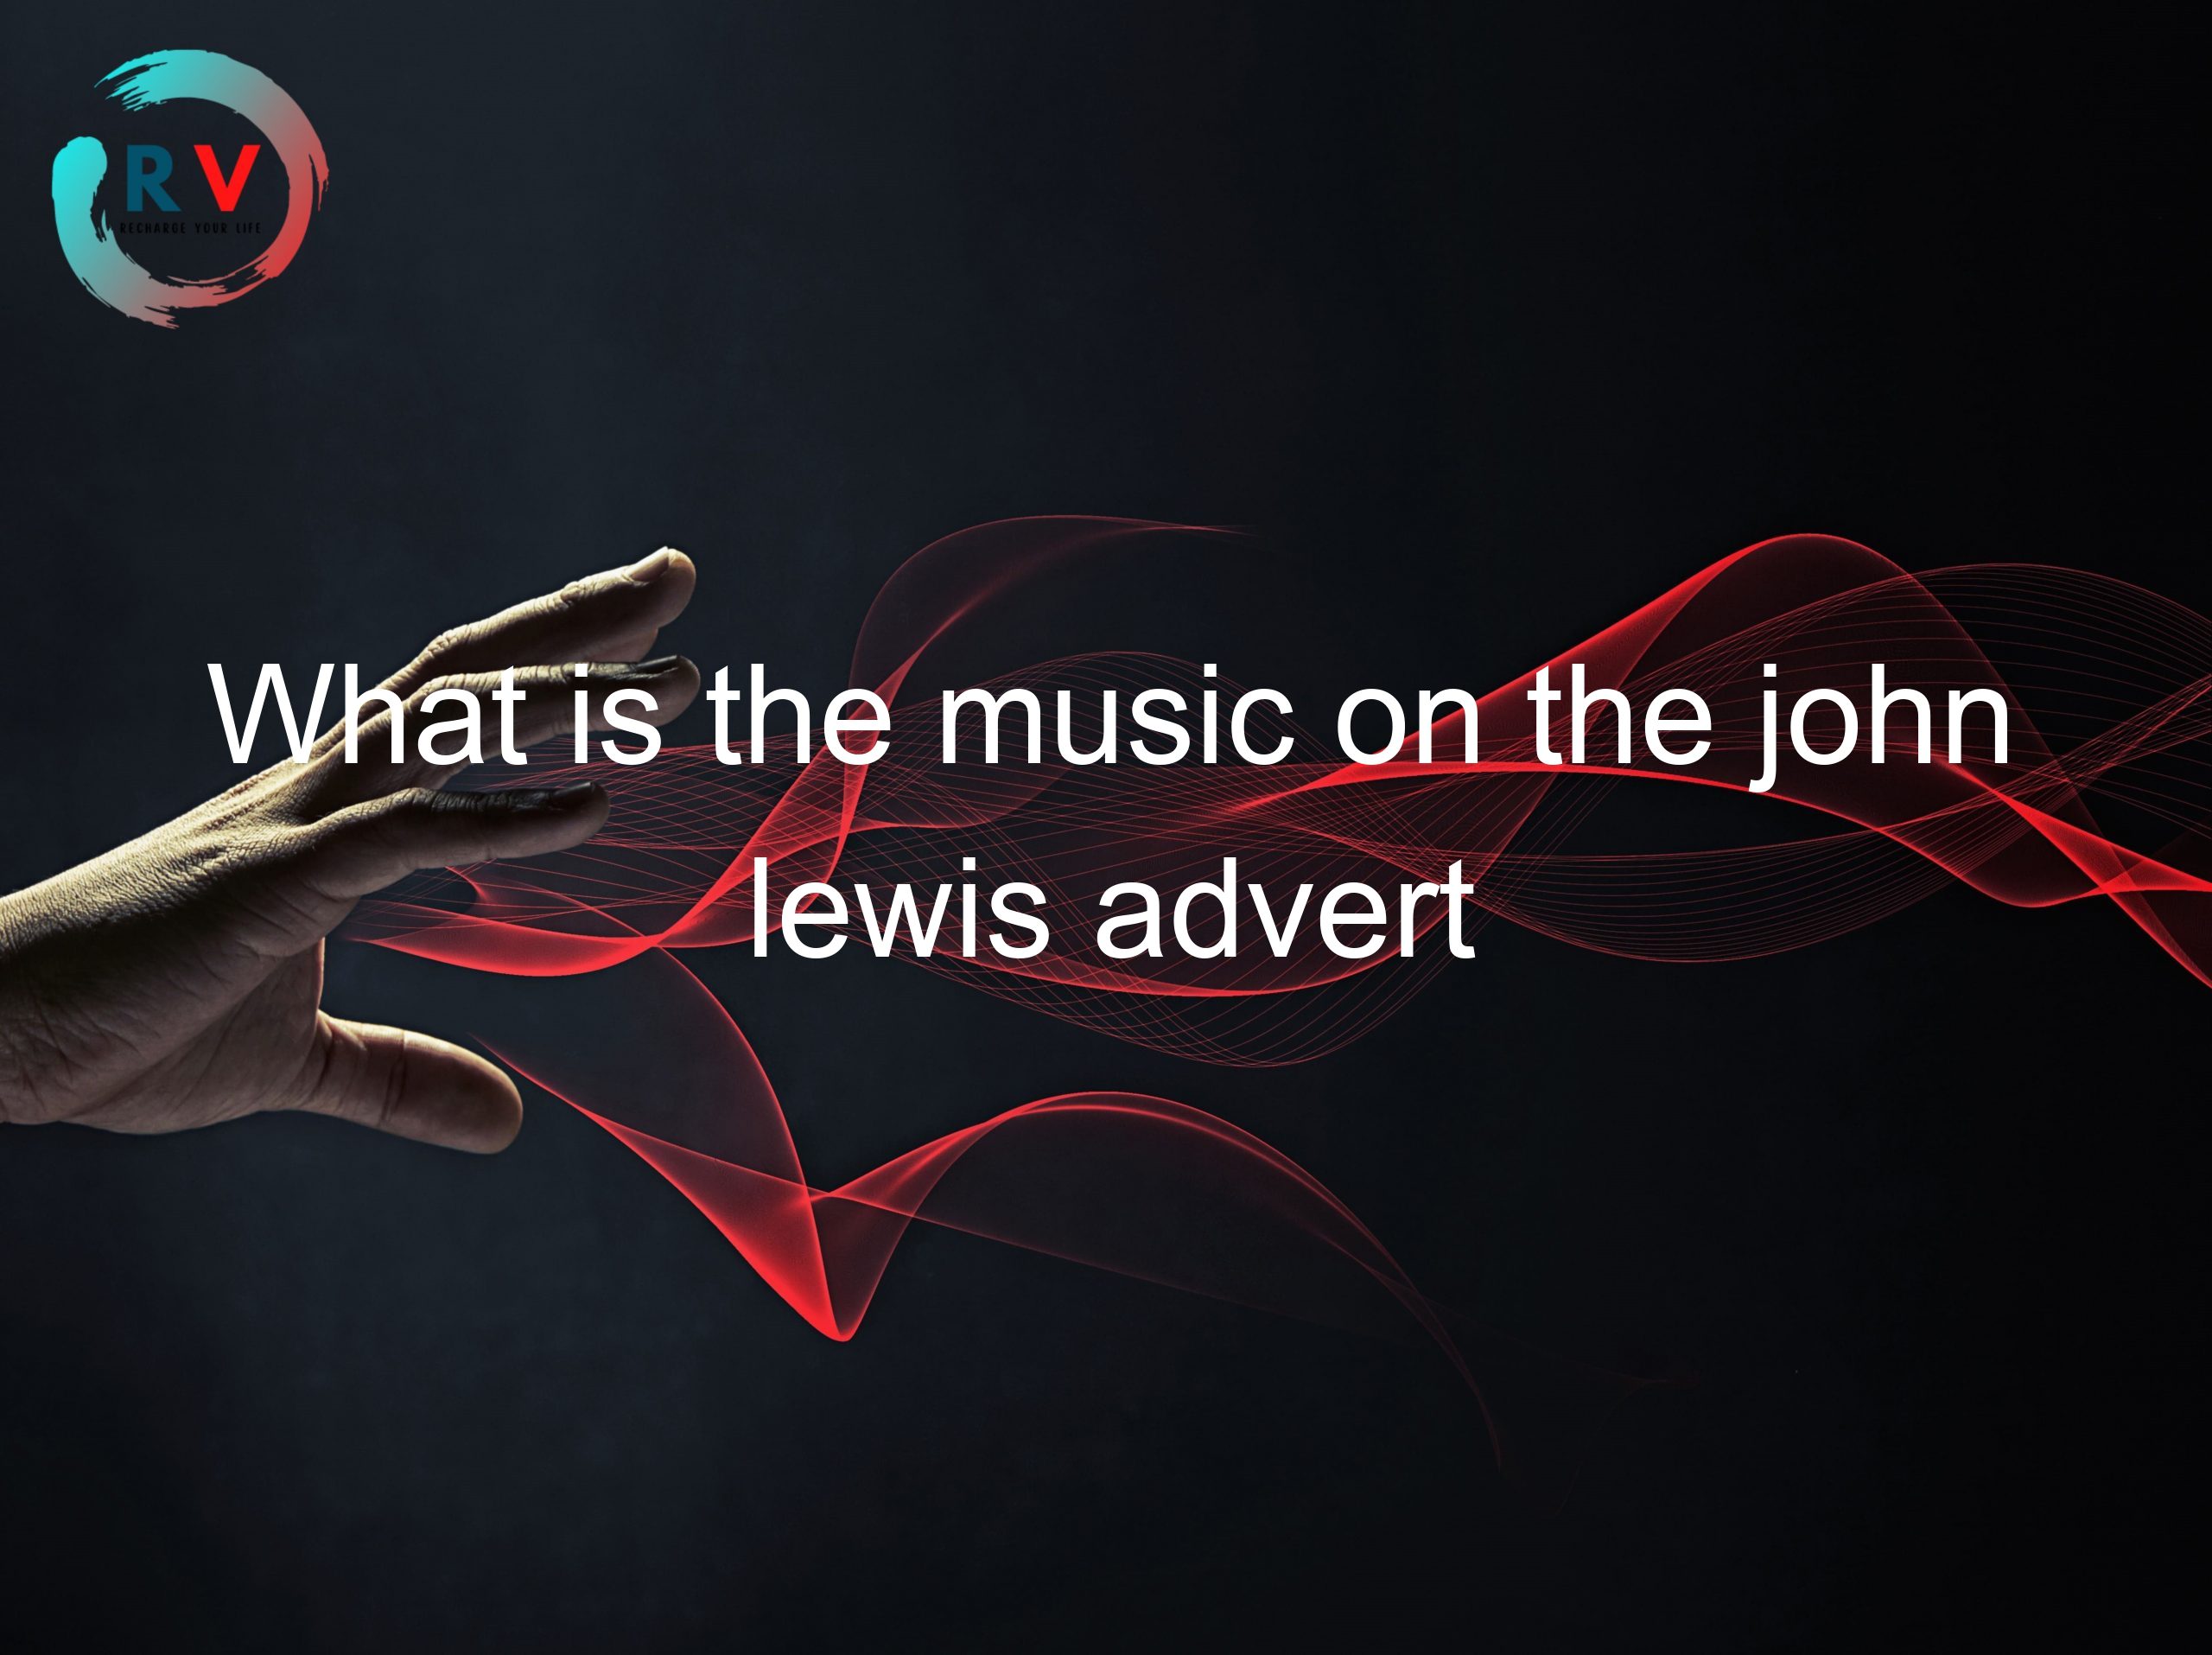 What is the music on the john lewis advert